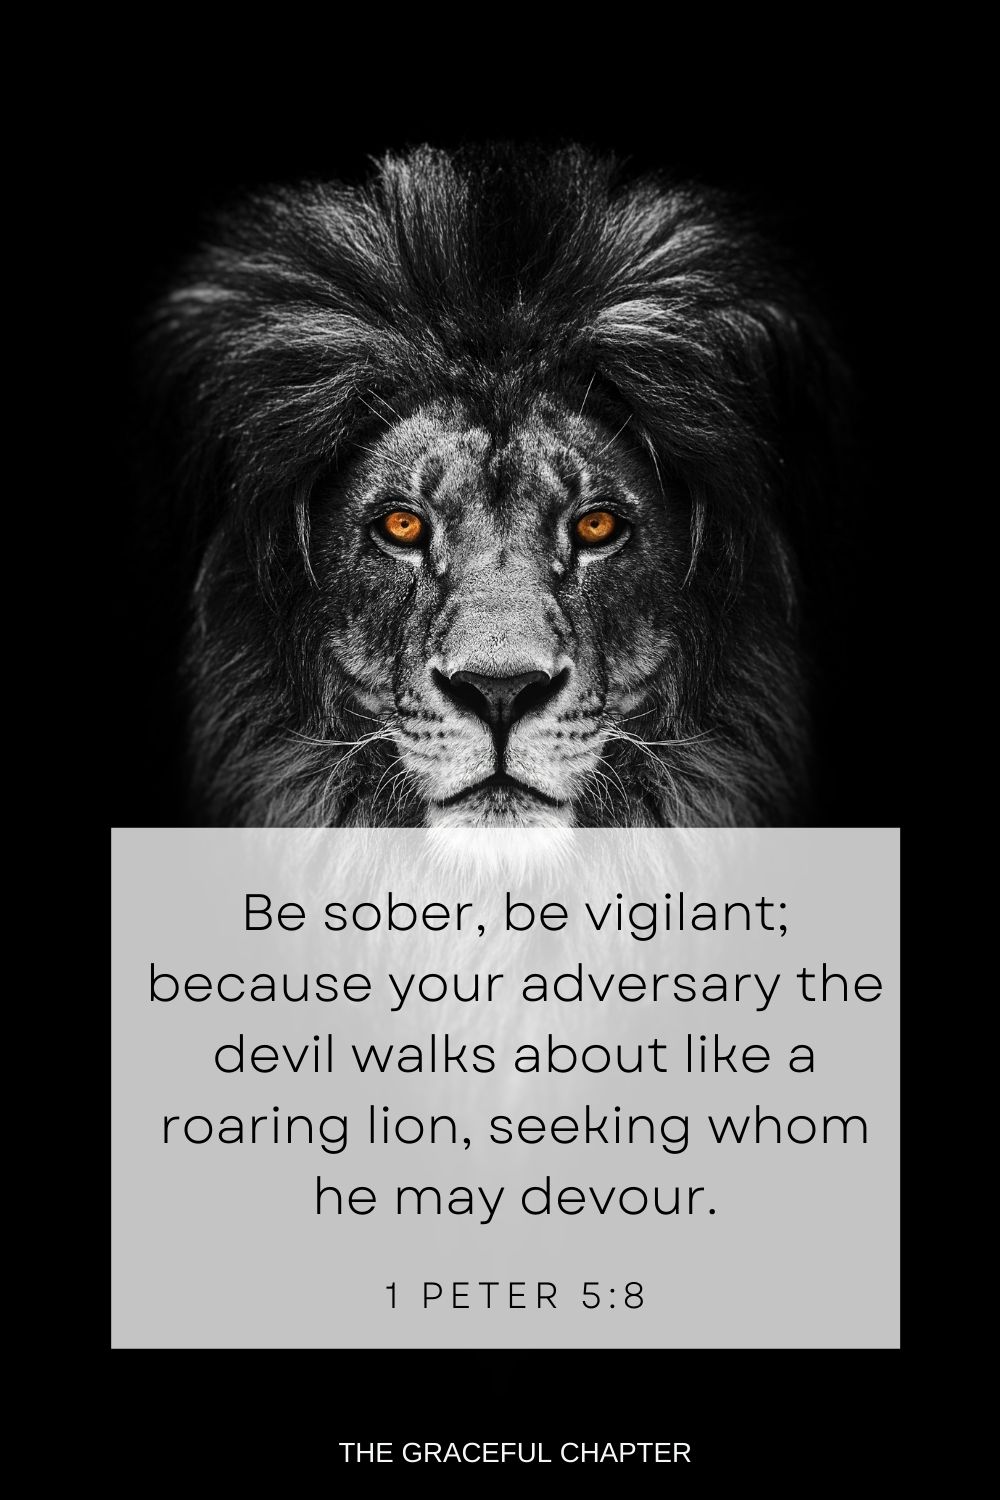 Be sober, be vigilant; because your adversary the devil walks about like a roaring lion, seeking whom he may devour. 1 Peter 5:8